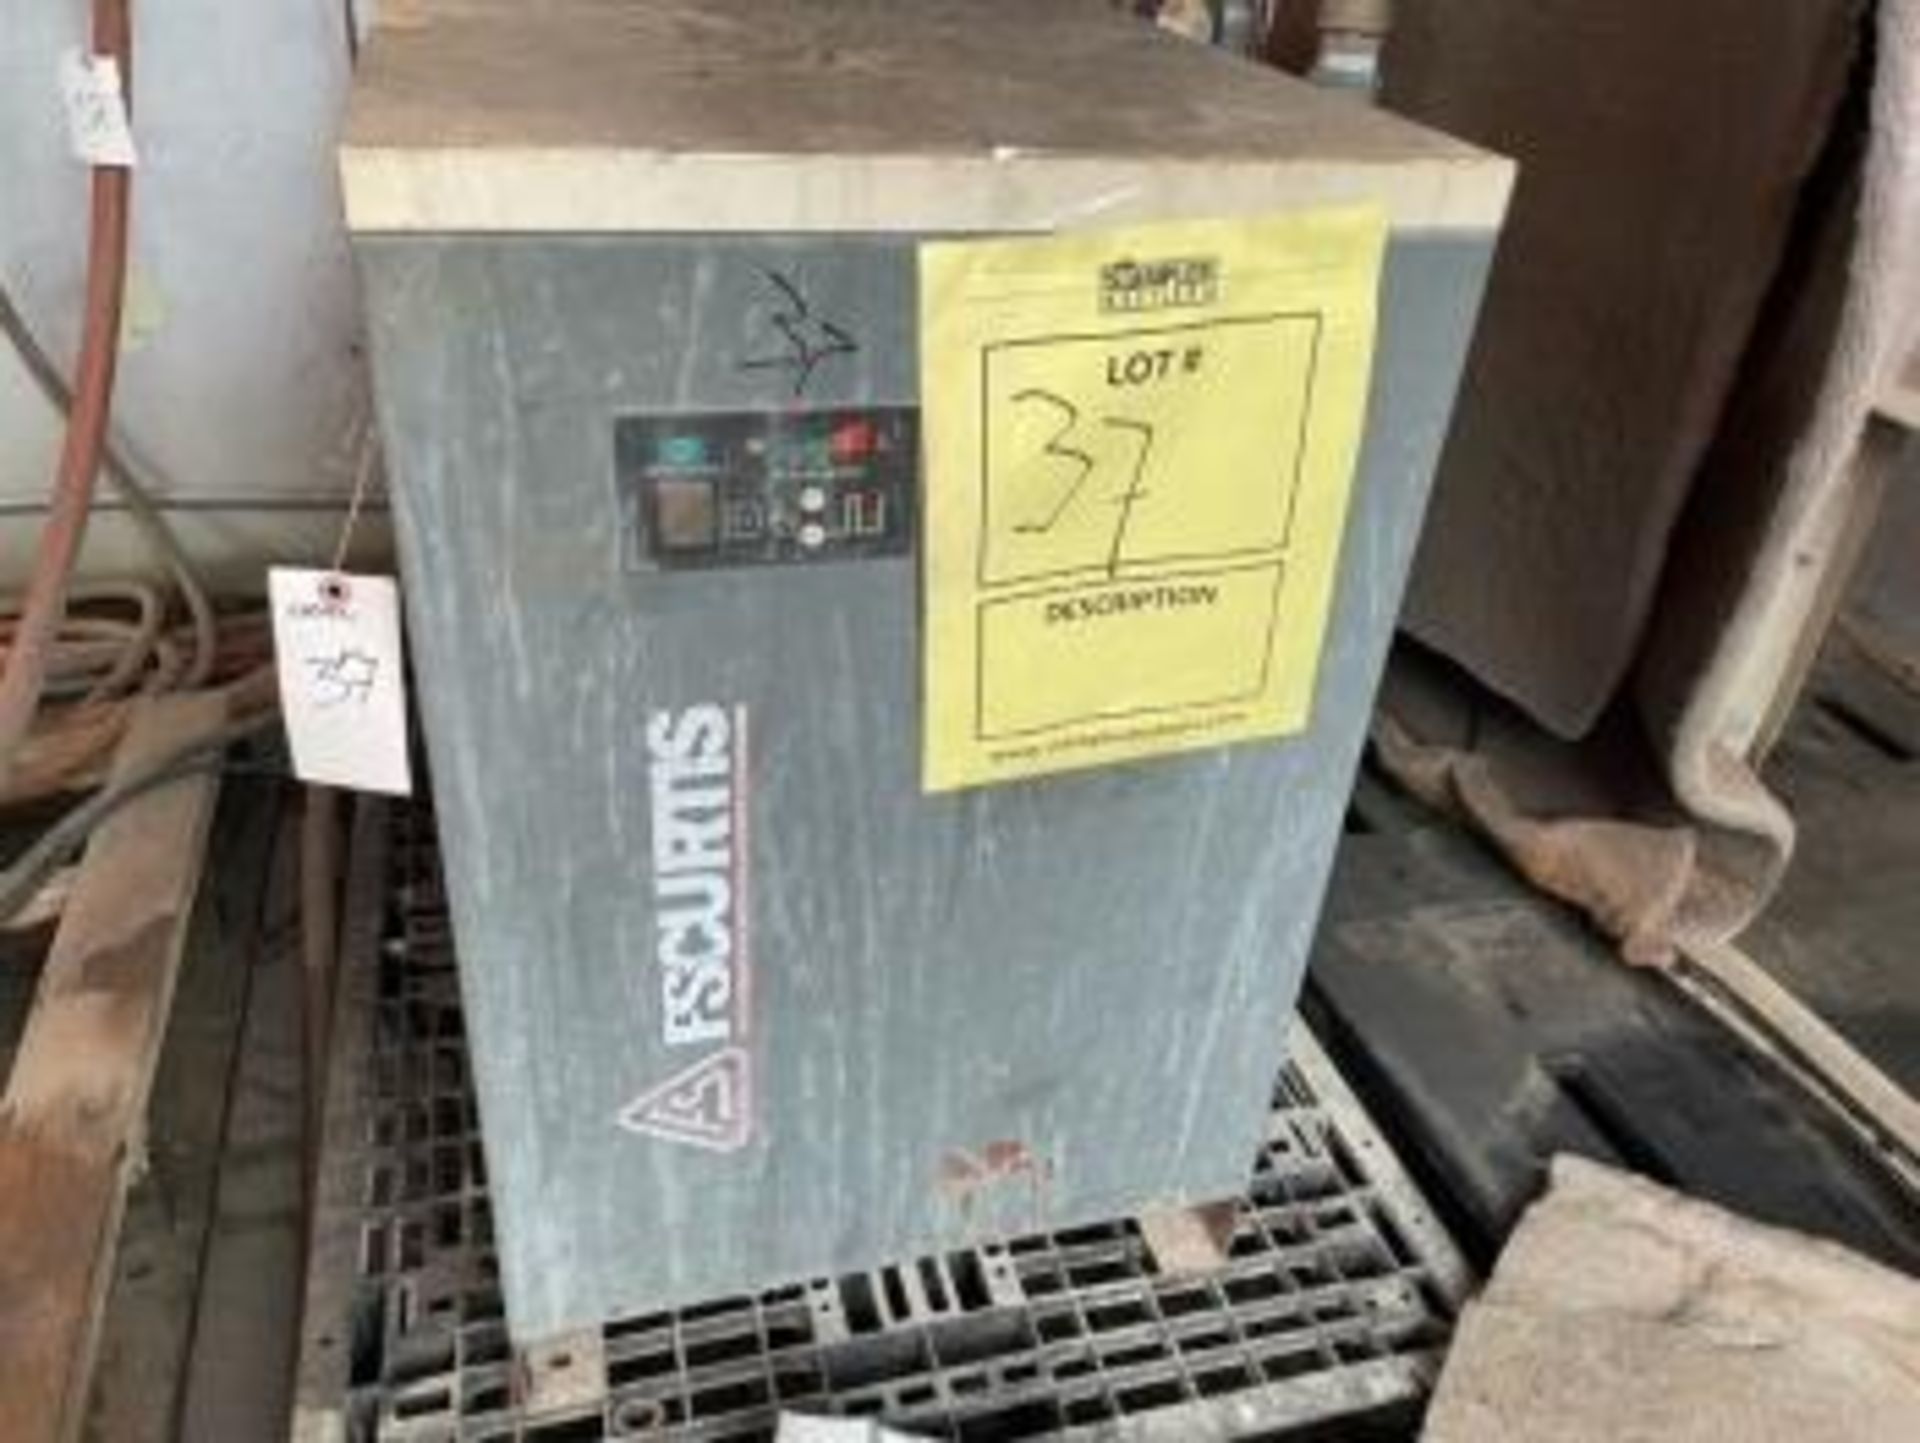 FS CURTIS AIR DRYER WITH 2 FILTERS - 220V (NO PIPING) (LOCATED IN HIALEAH, FL)